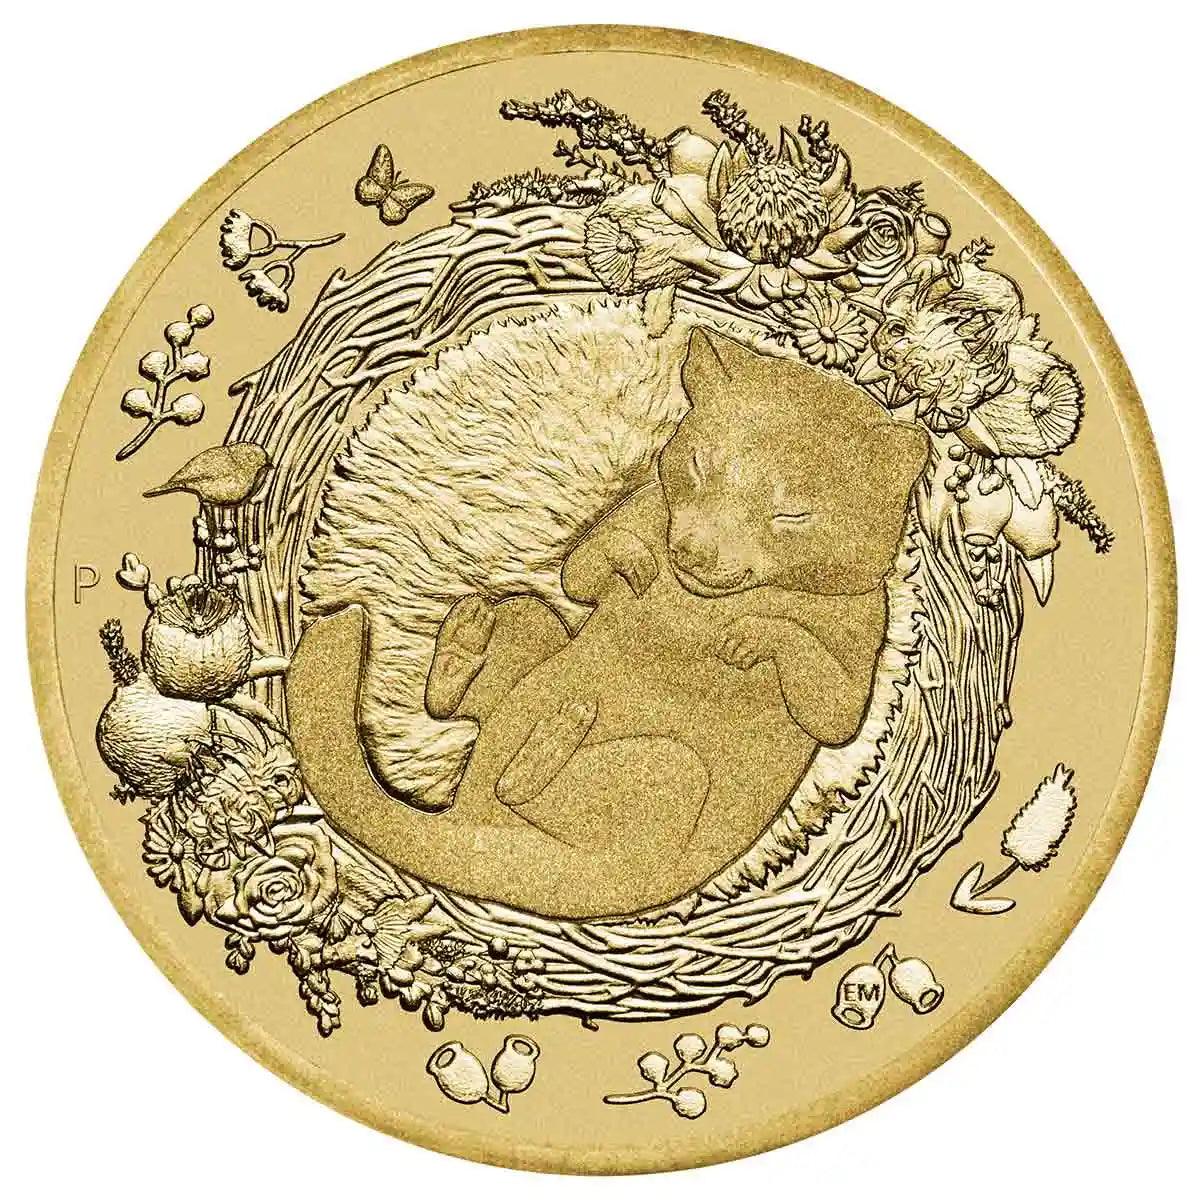 2021 Dreaming Down Under Tasmanian Devil $1 Coin and Stamp Cover - Loose Change Coins